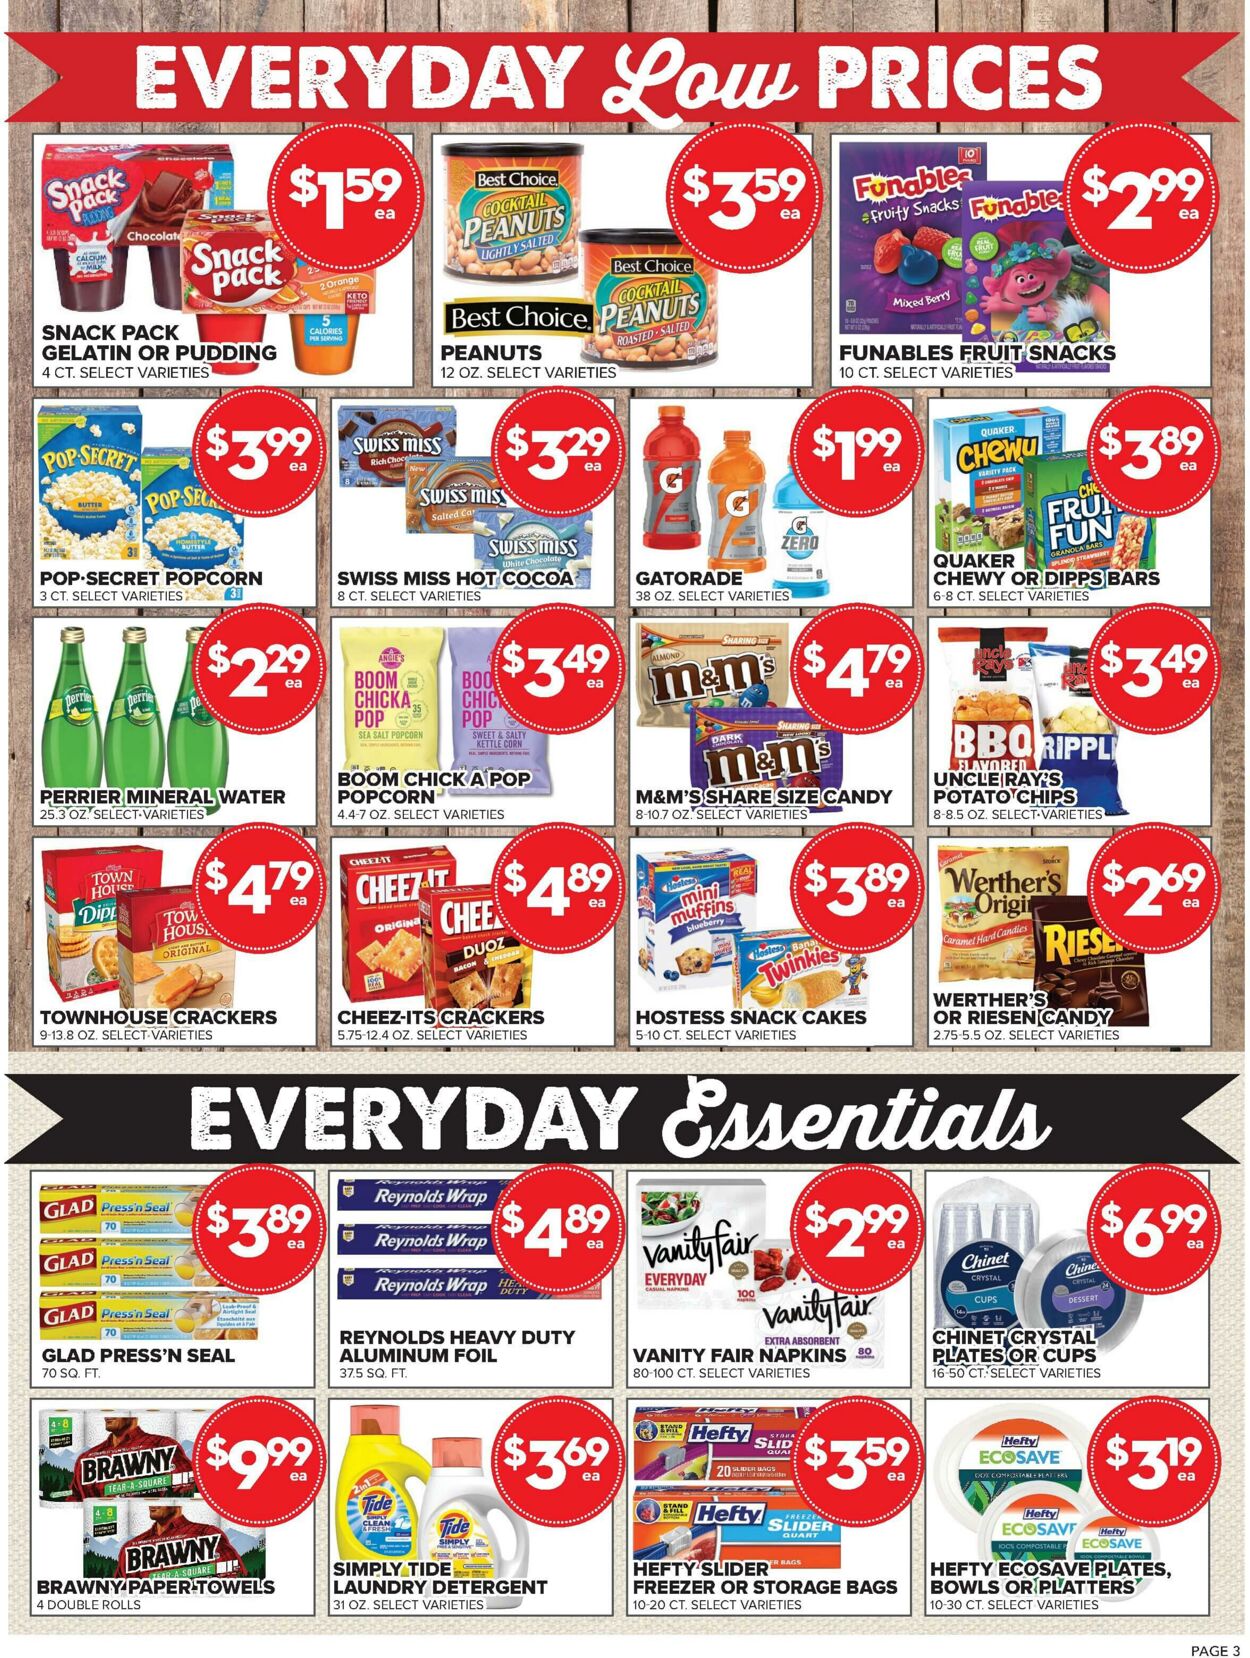 Weekly ad Price Cutter 11/30/2022 - 12/27/2022